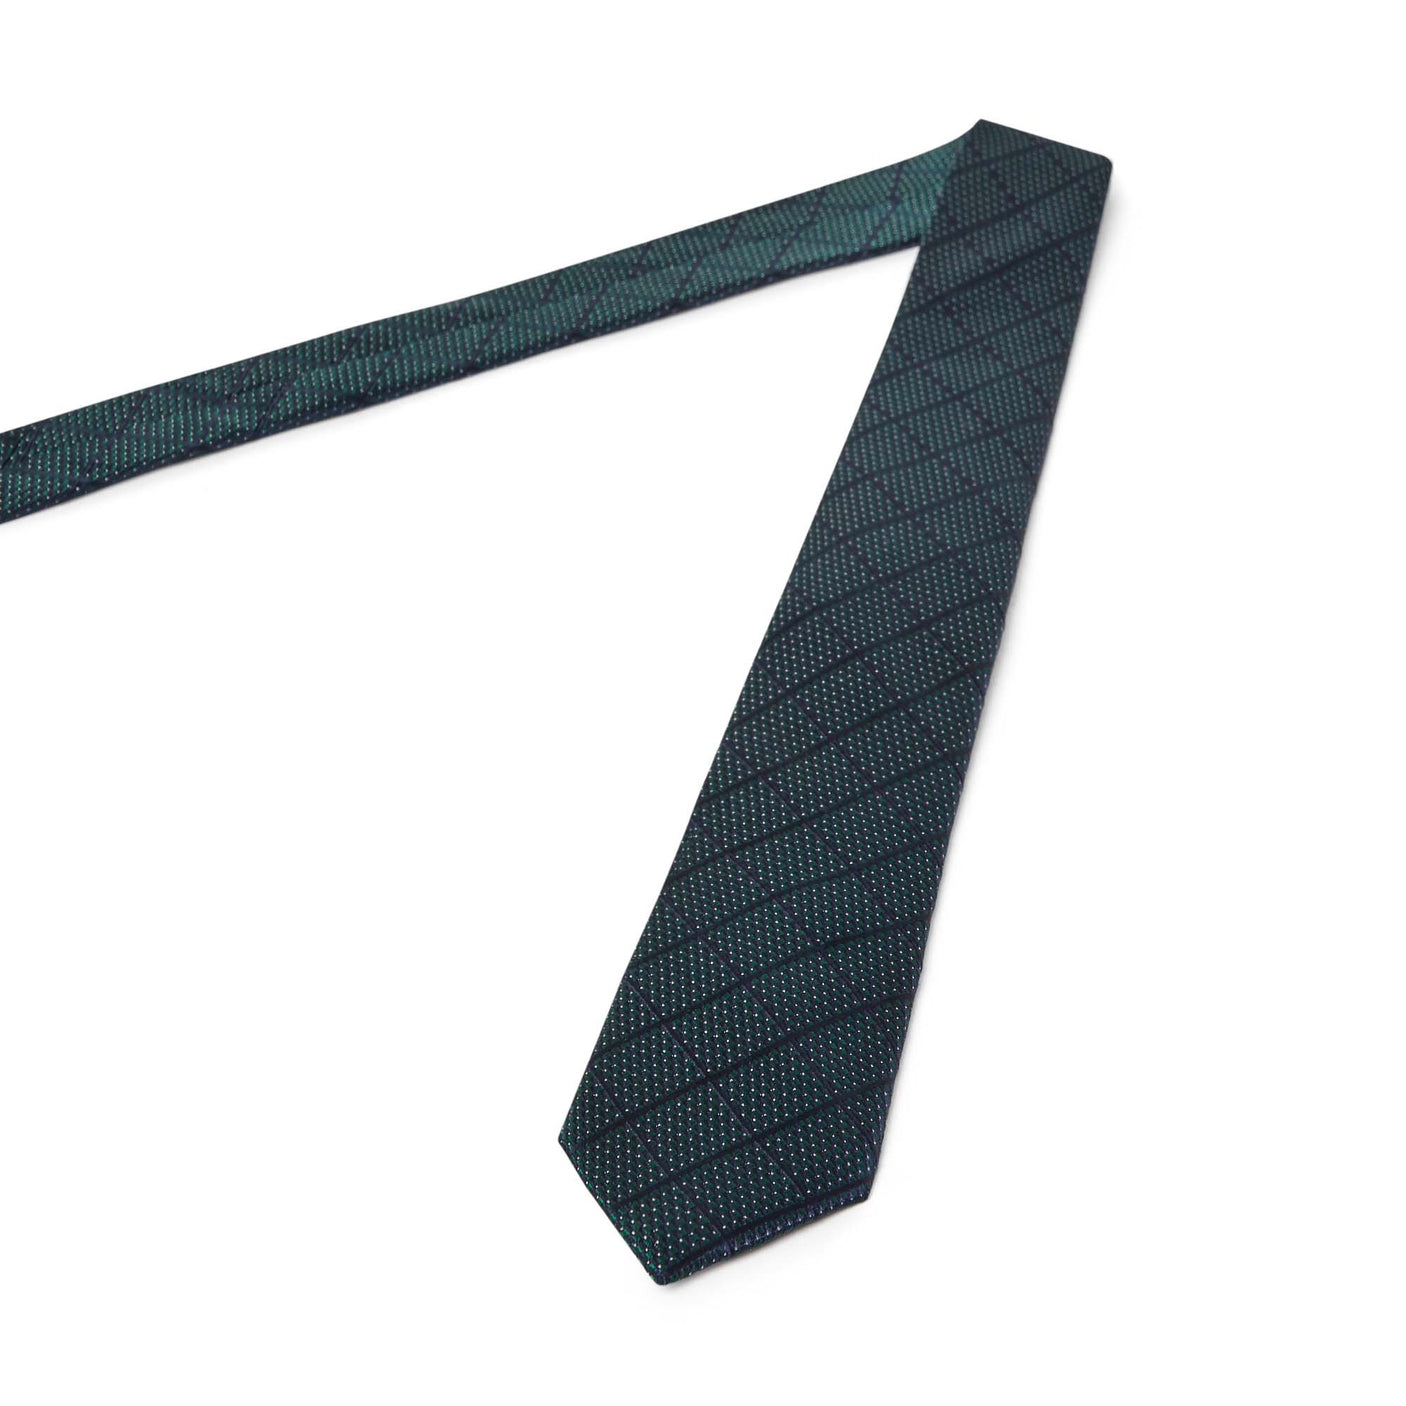 Checked tie - green and navy blue